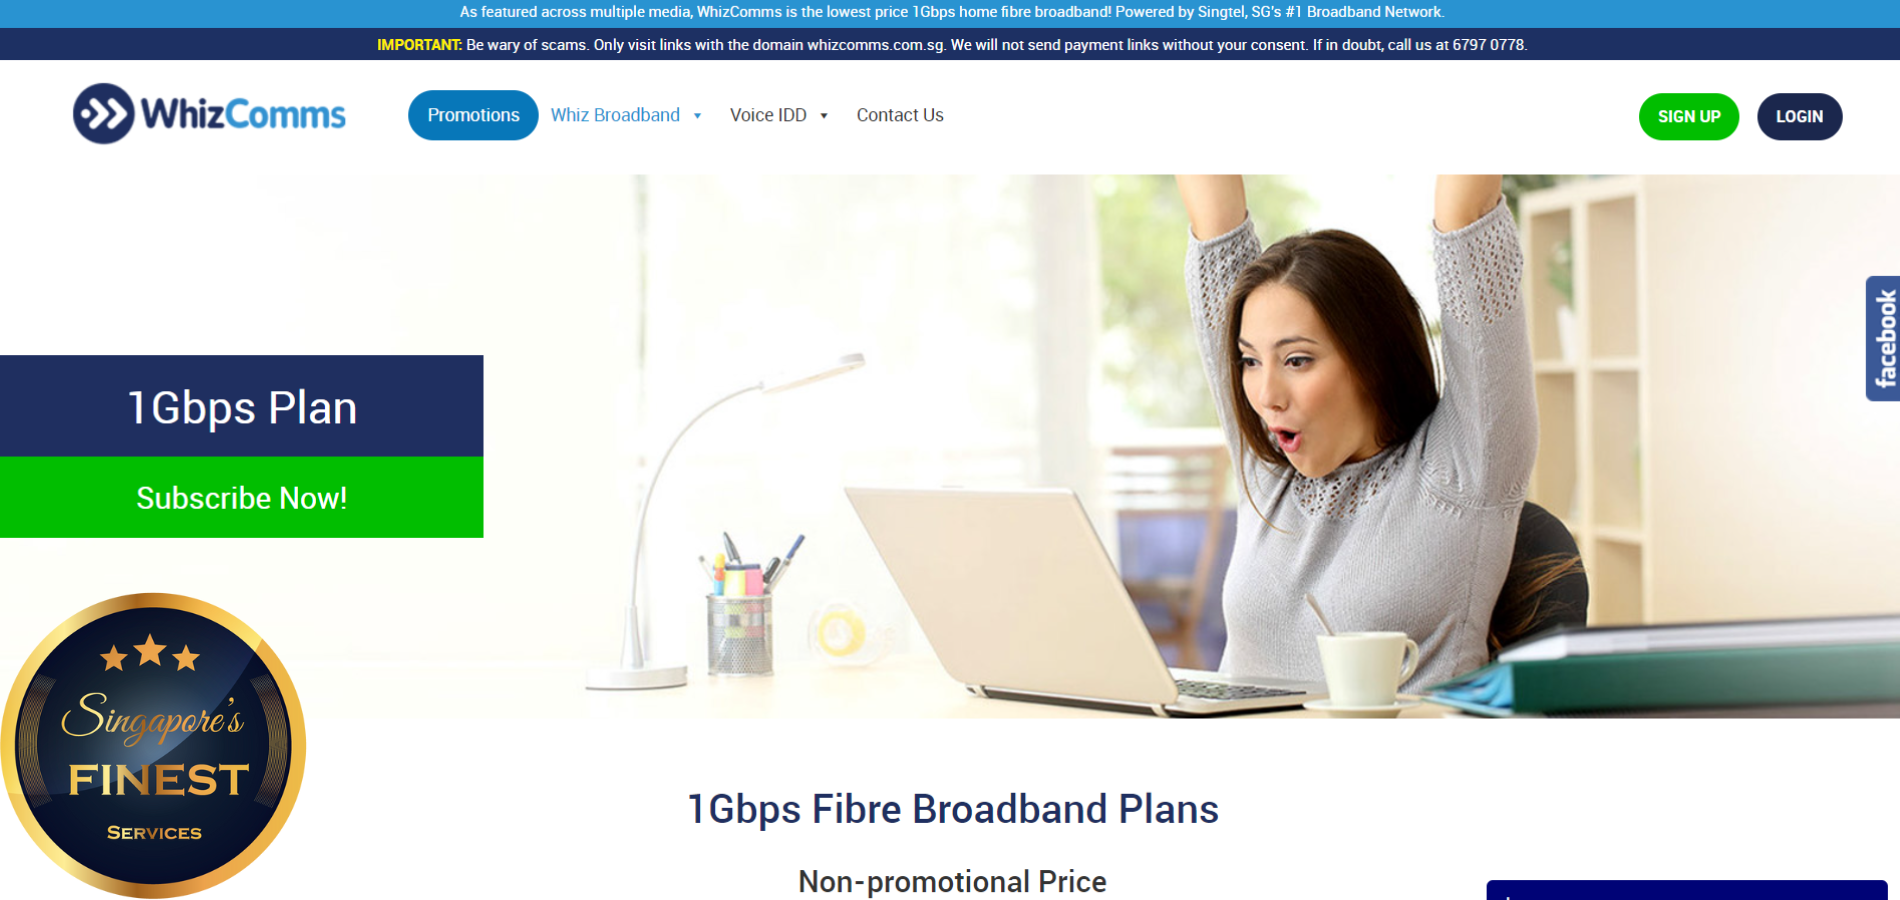 The Finest Cheapest Broadband in Singapore